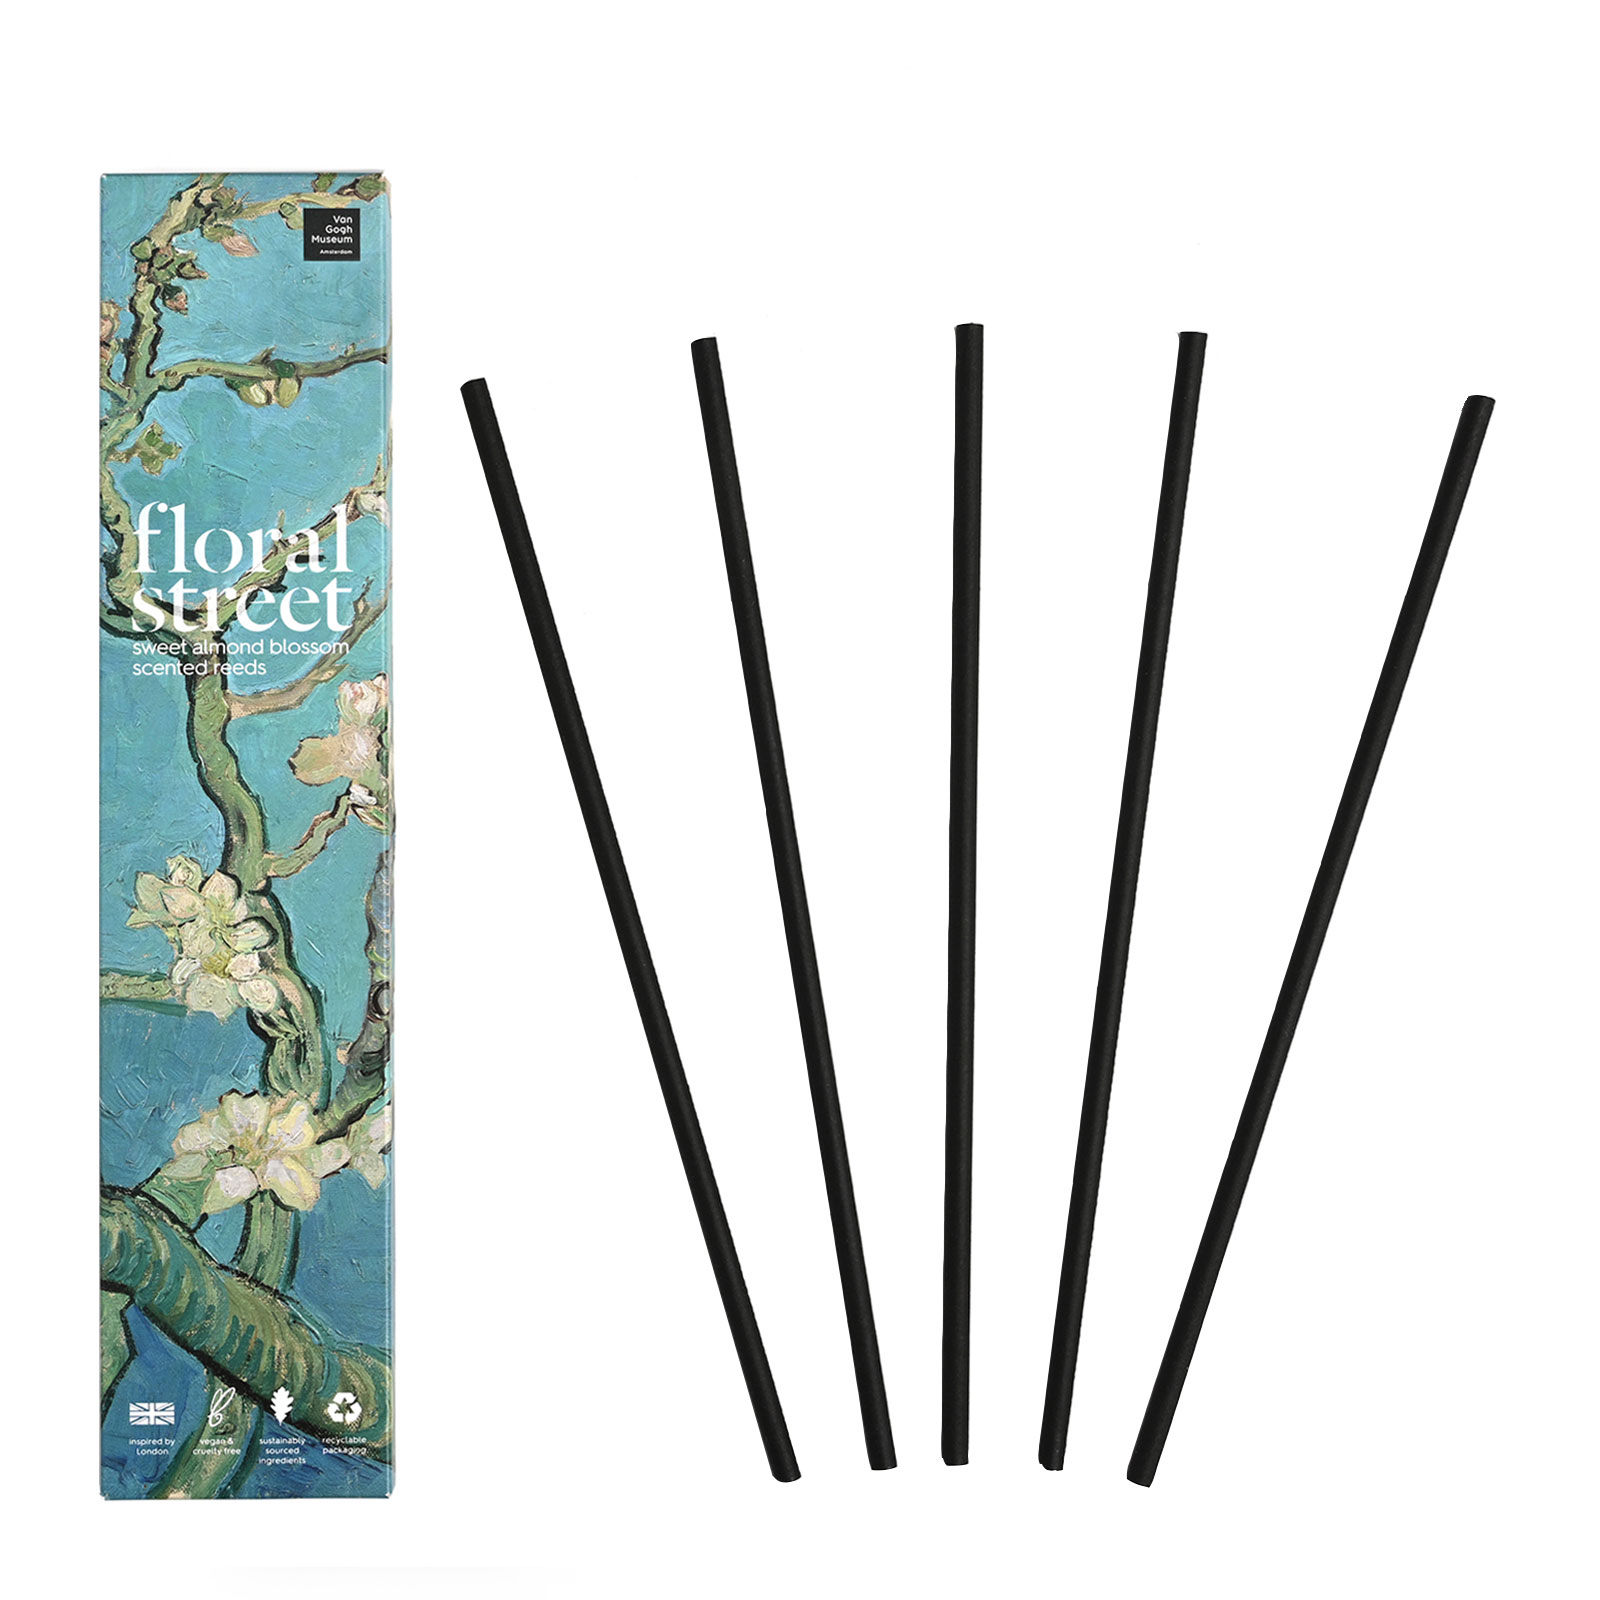 Floral Street Sweet Almond Blossom Scented Reeds X 5